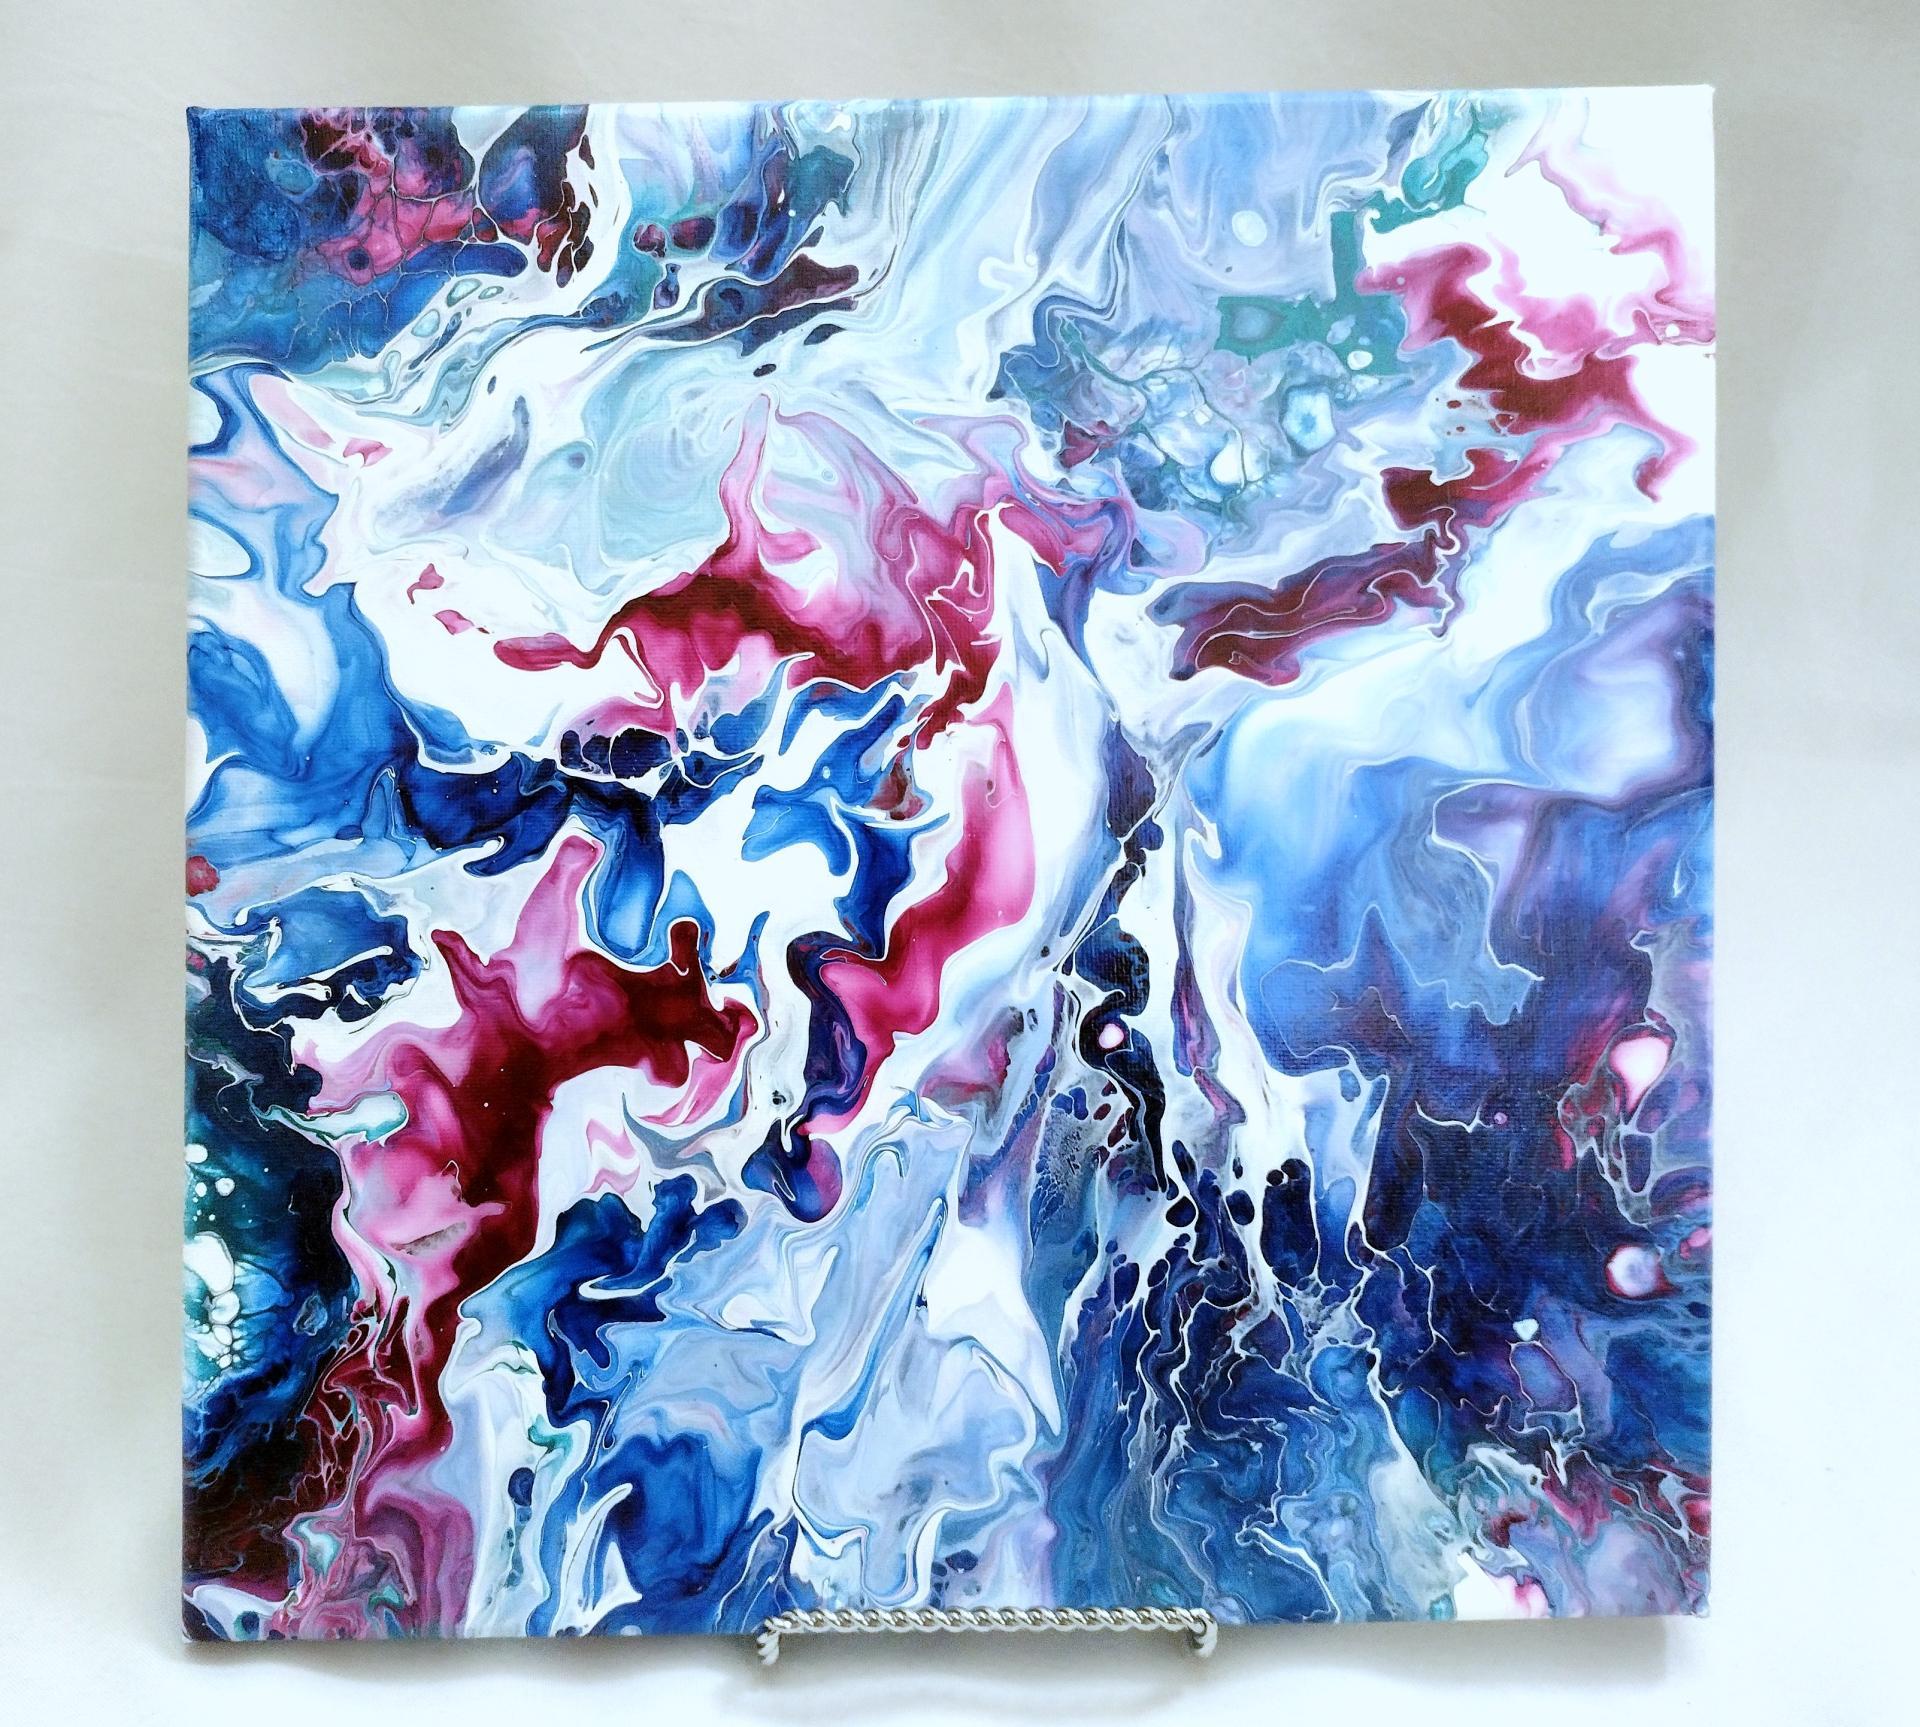 Resin Art Vs Acrylic Pour: Discover Their Differences – ArtResin